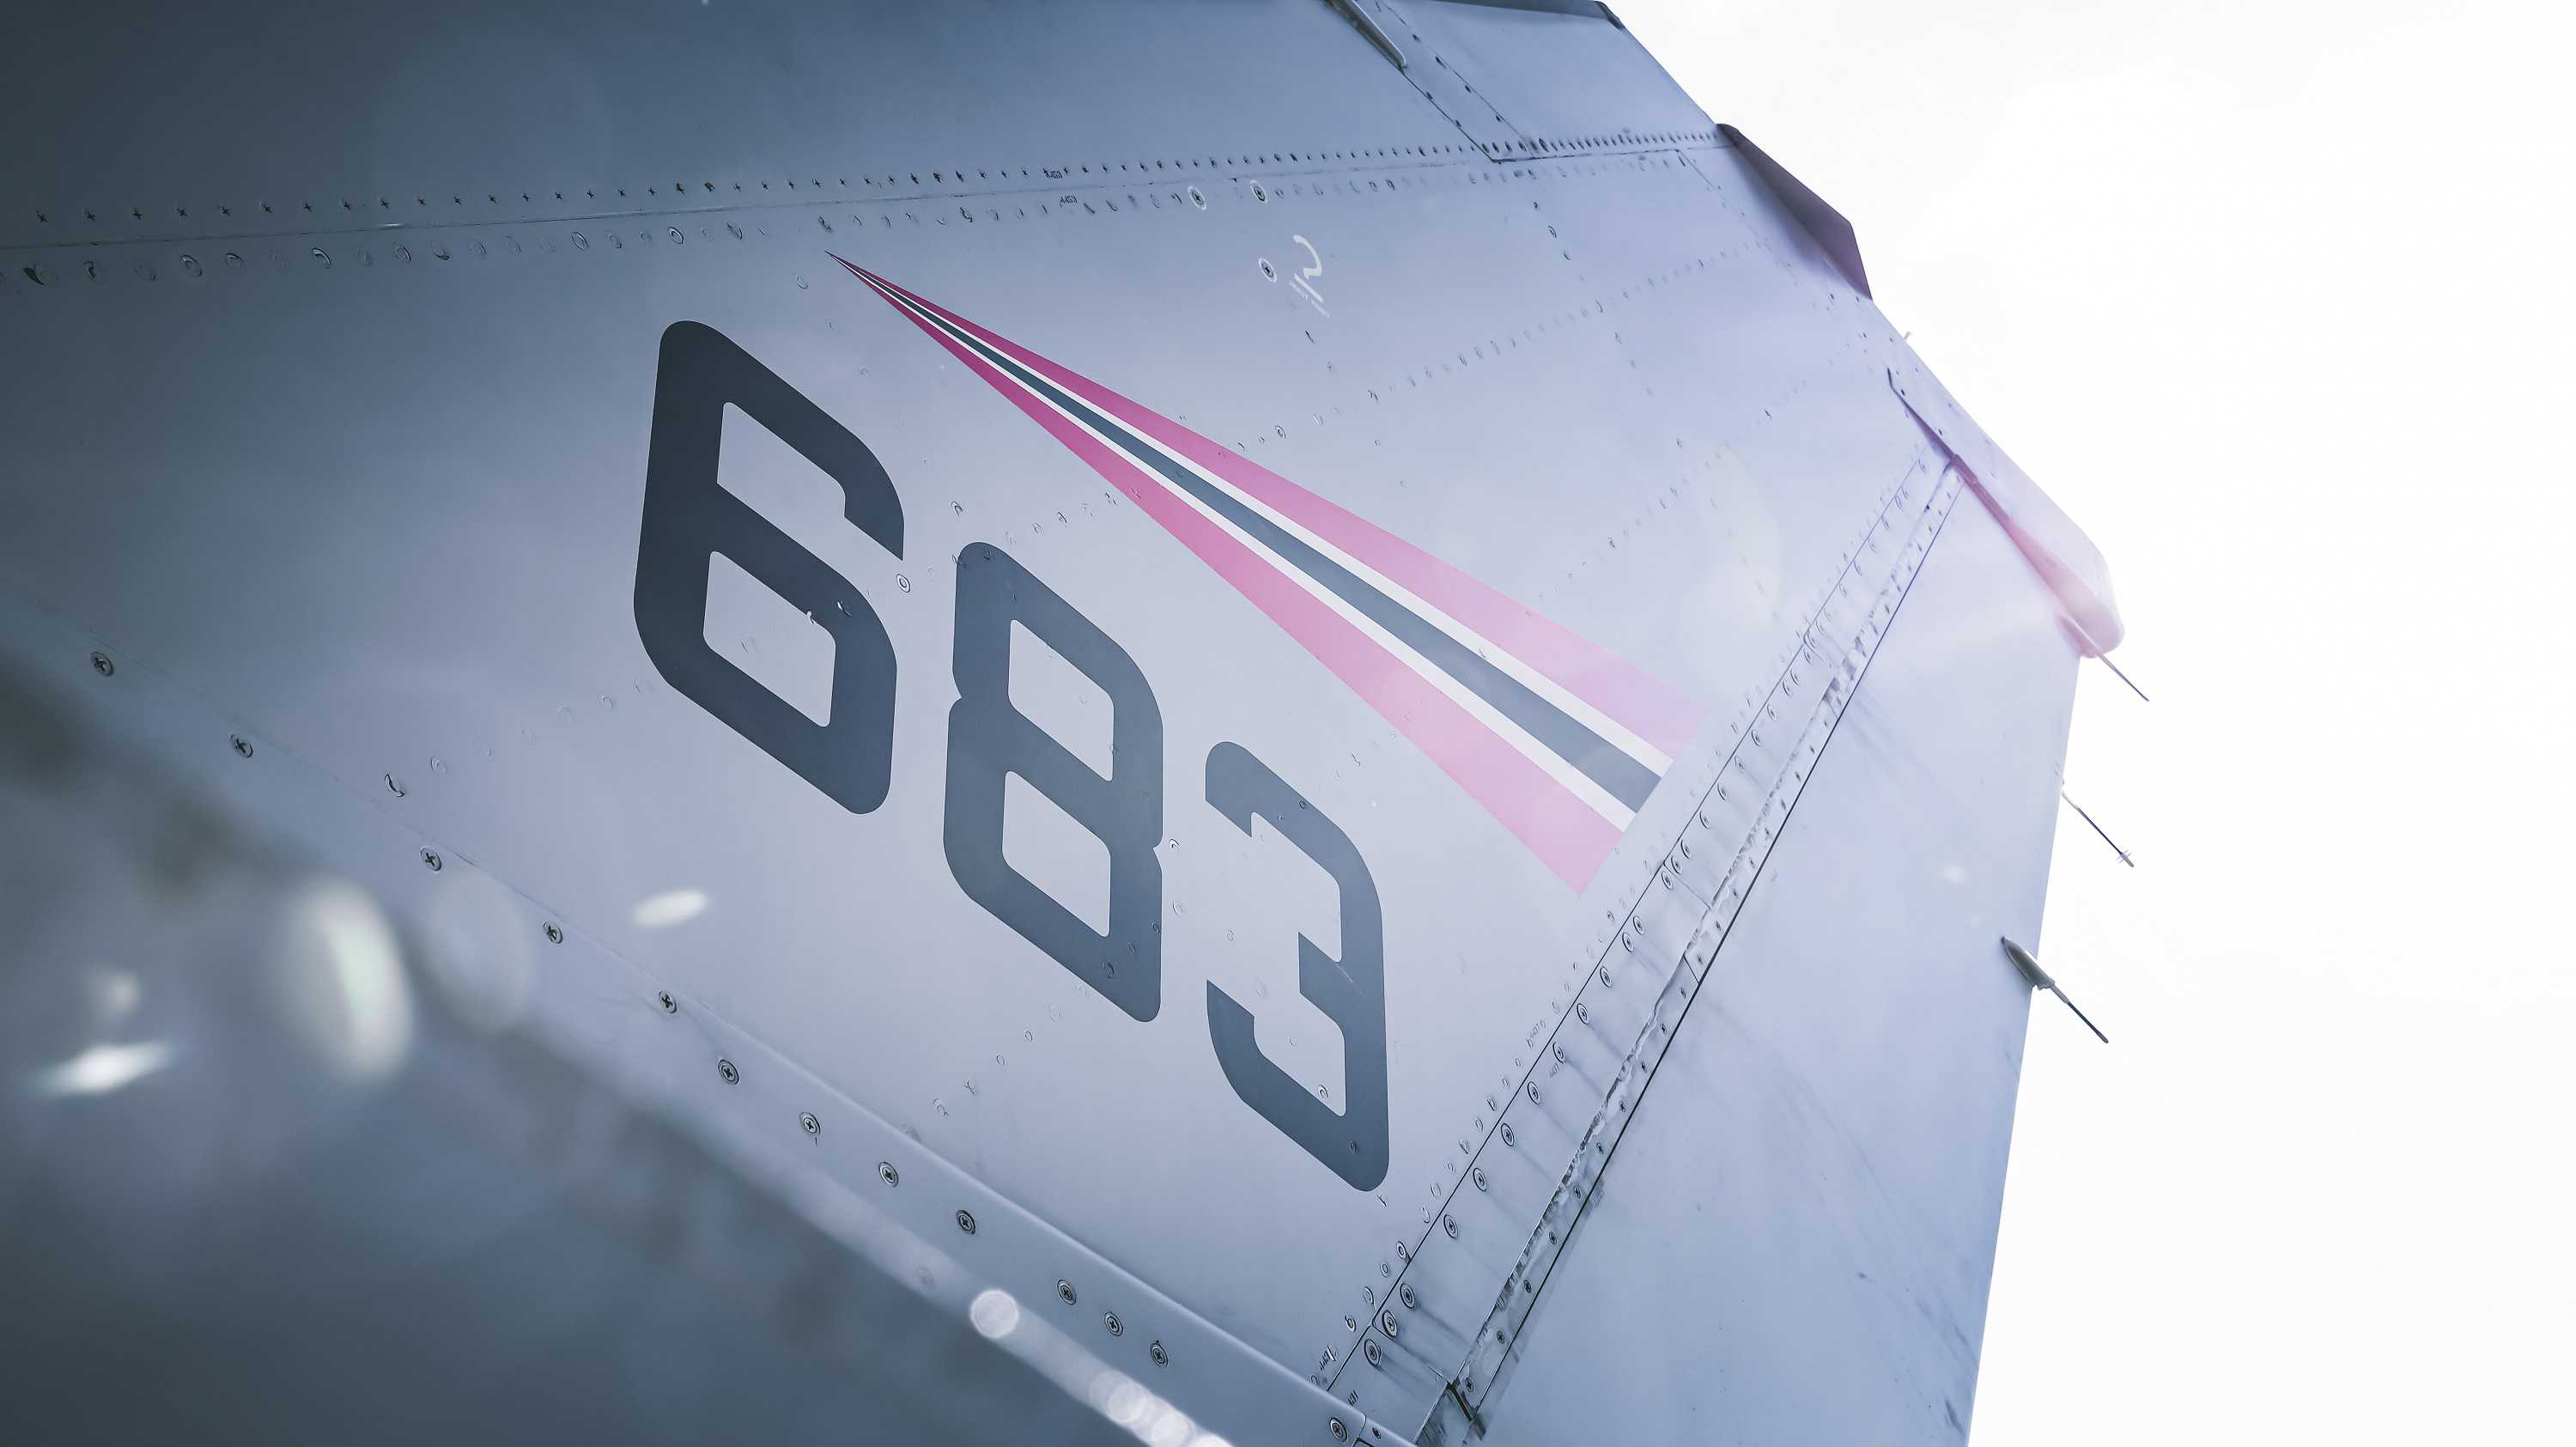 F-16 tail with number 683